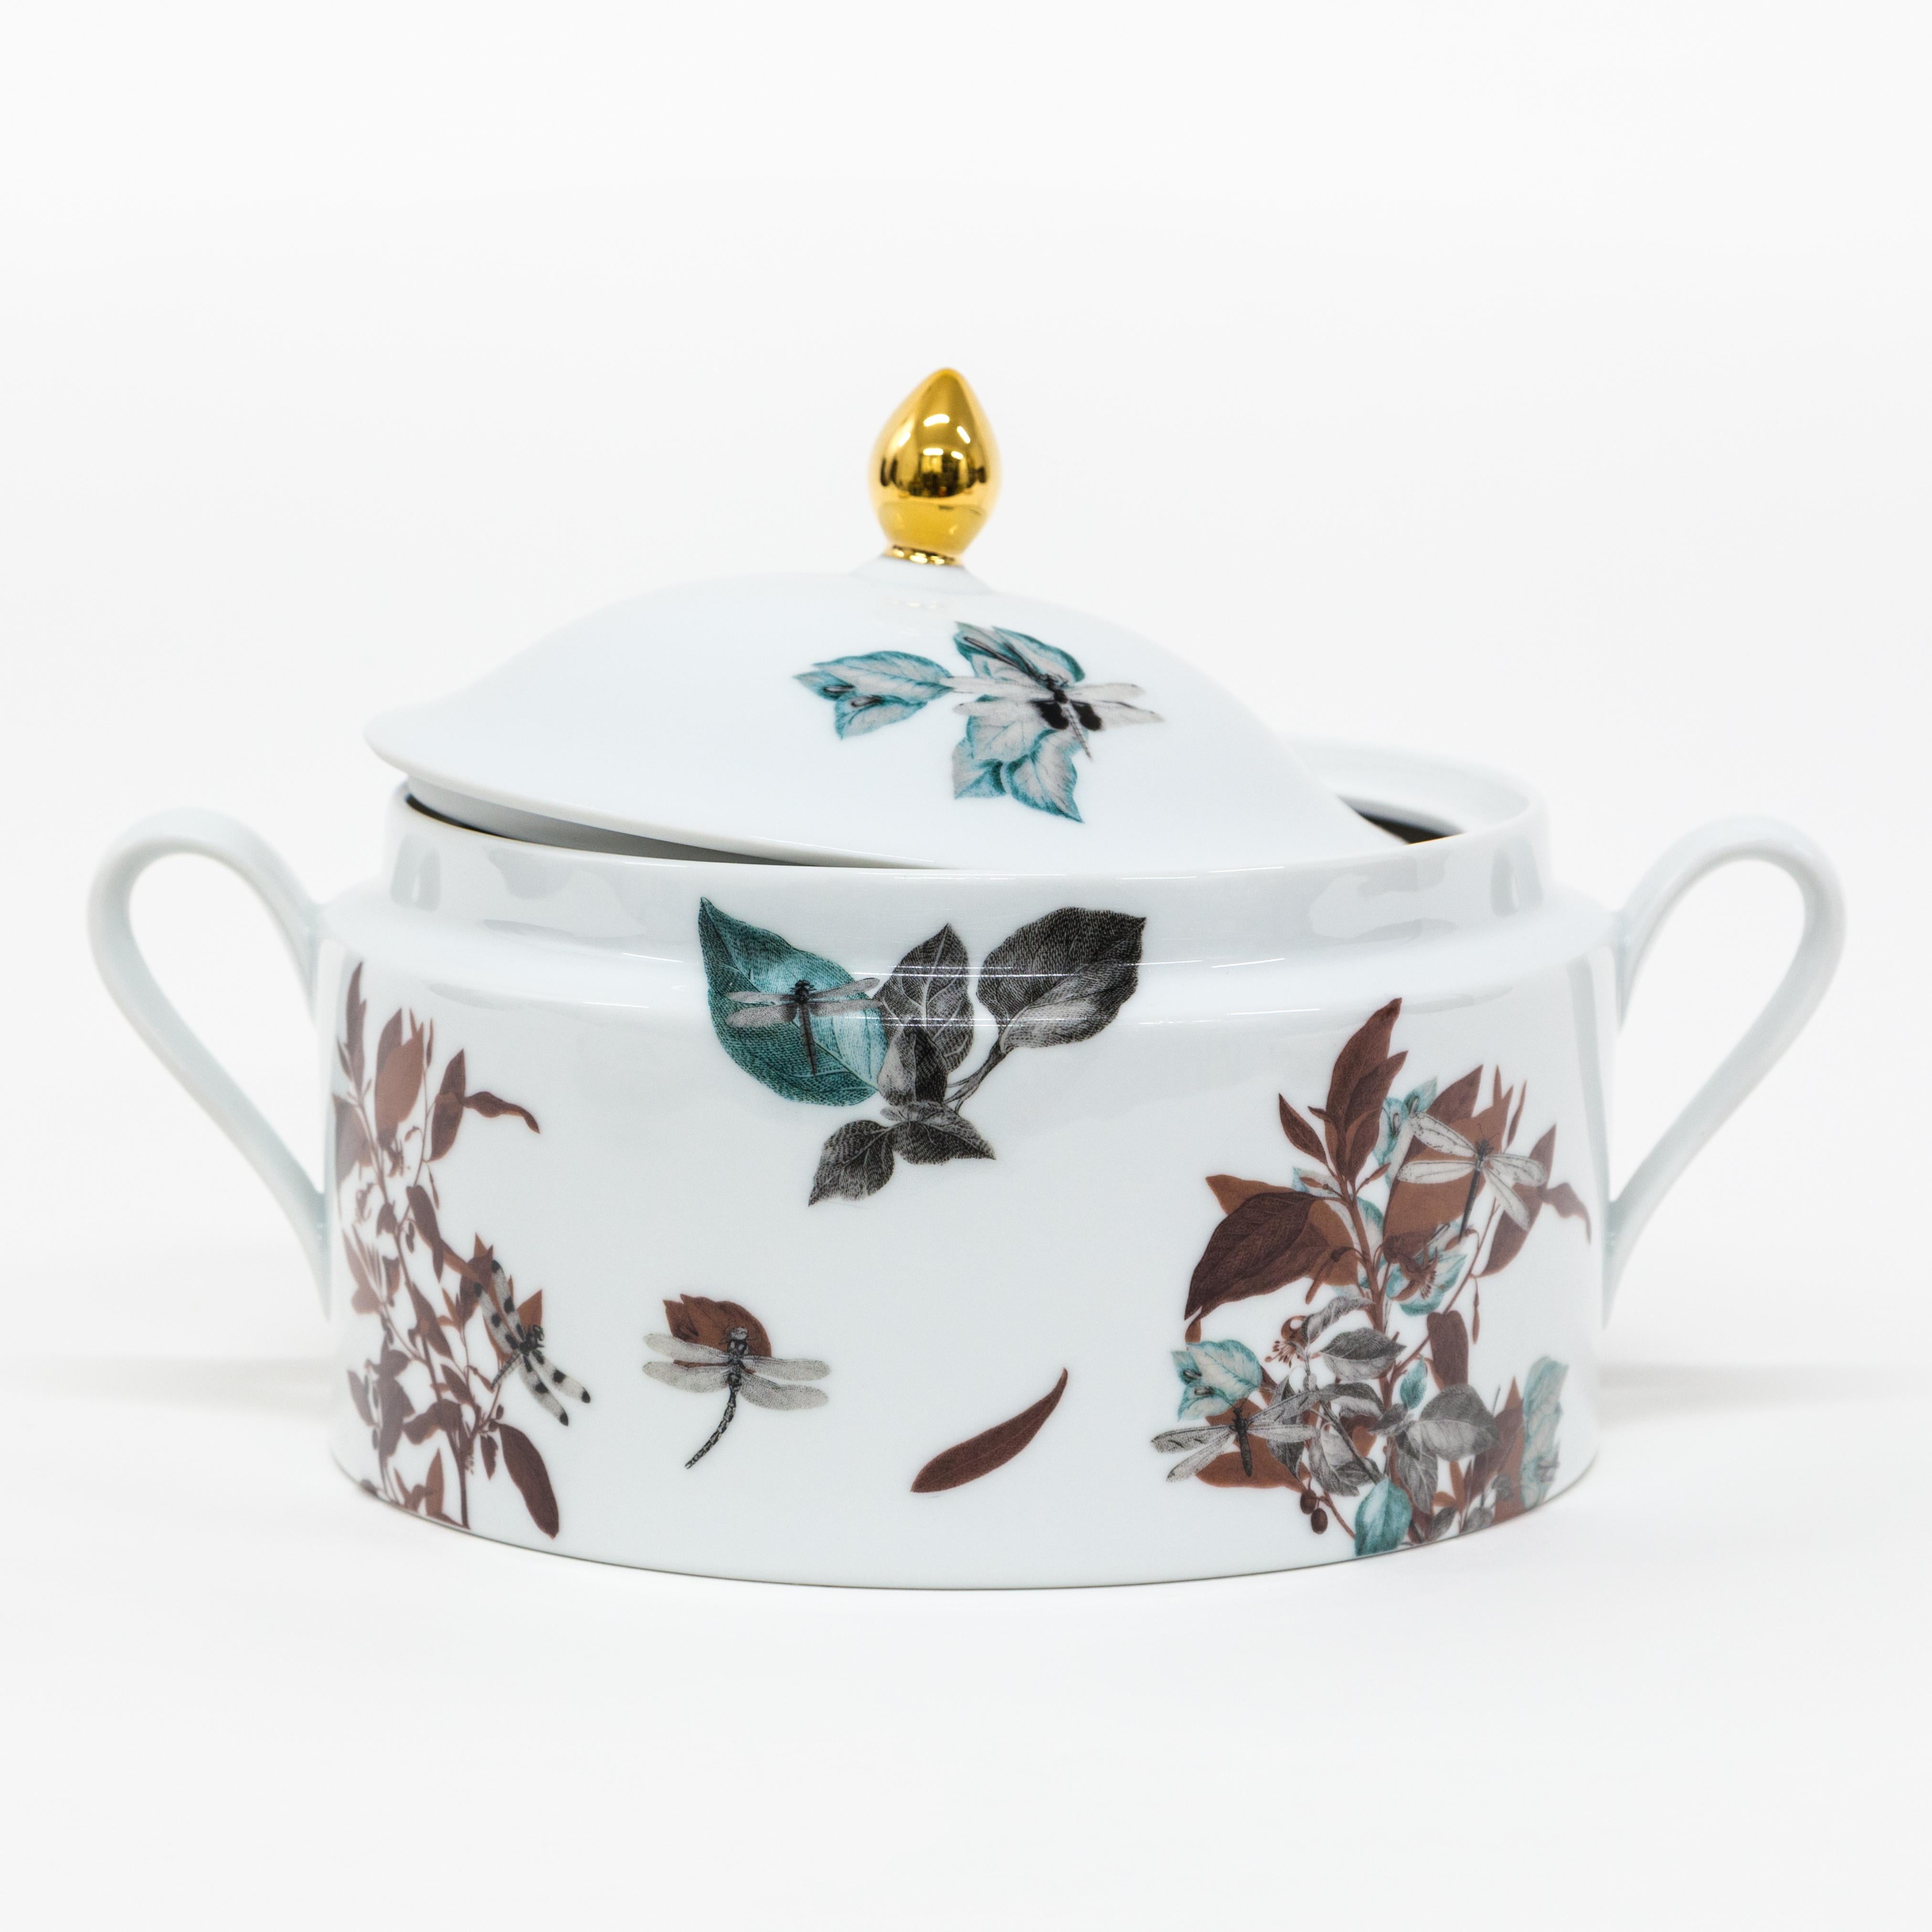 This soup tureen is a Grand Tour piece by Vito Nesta that is part of the Black Dragon Pool porcelain collection which inspired by the famous Chinese pond of the same name, located in the scenic Jade Spring Park. The designs in this collection